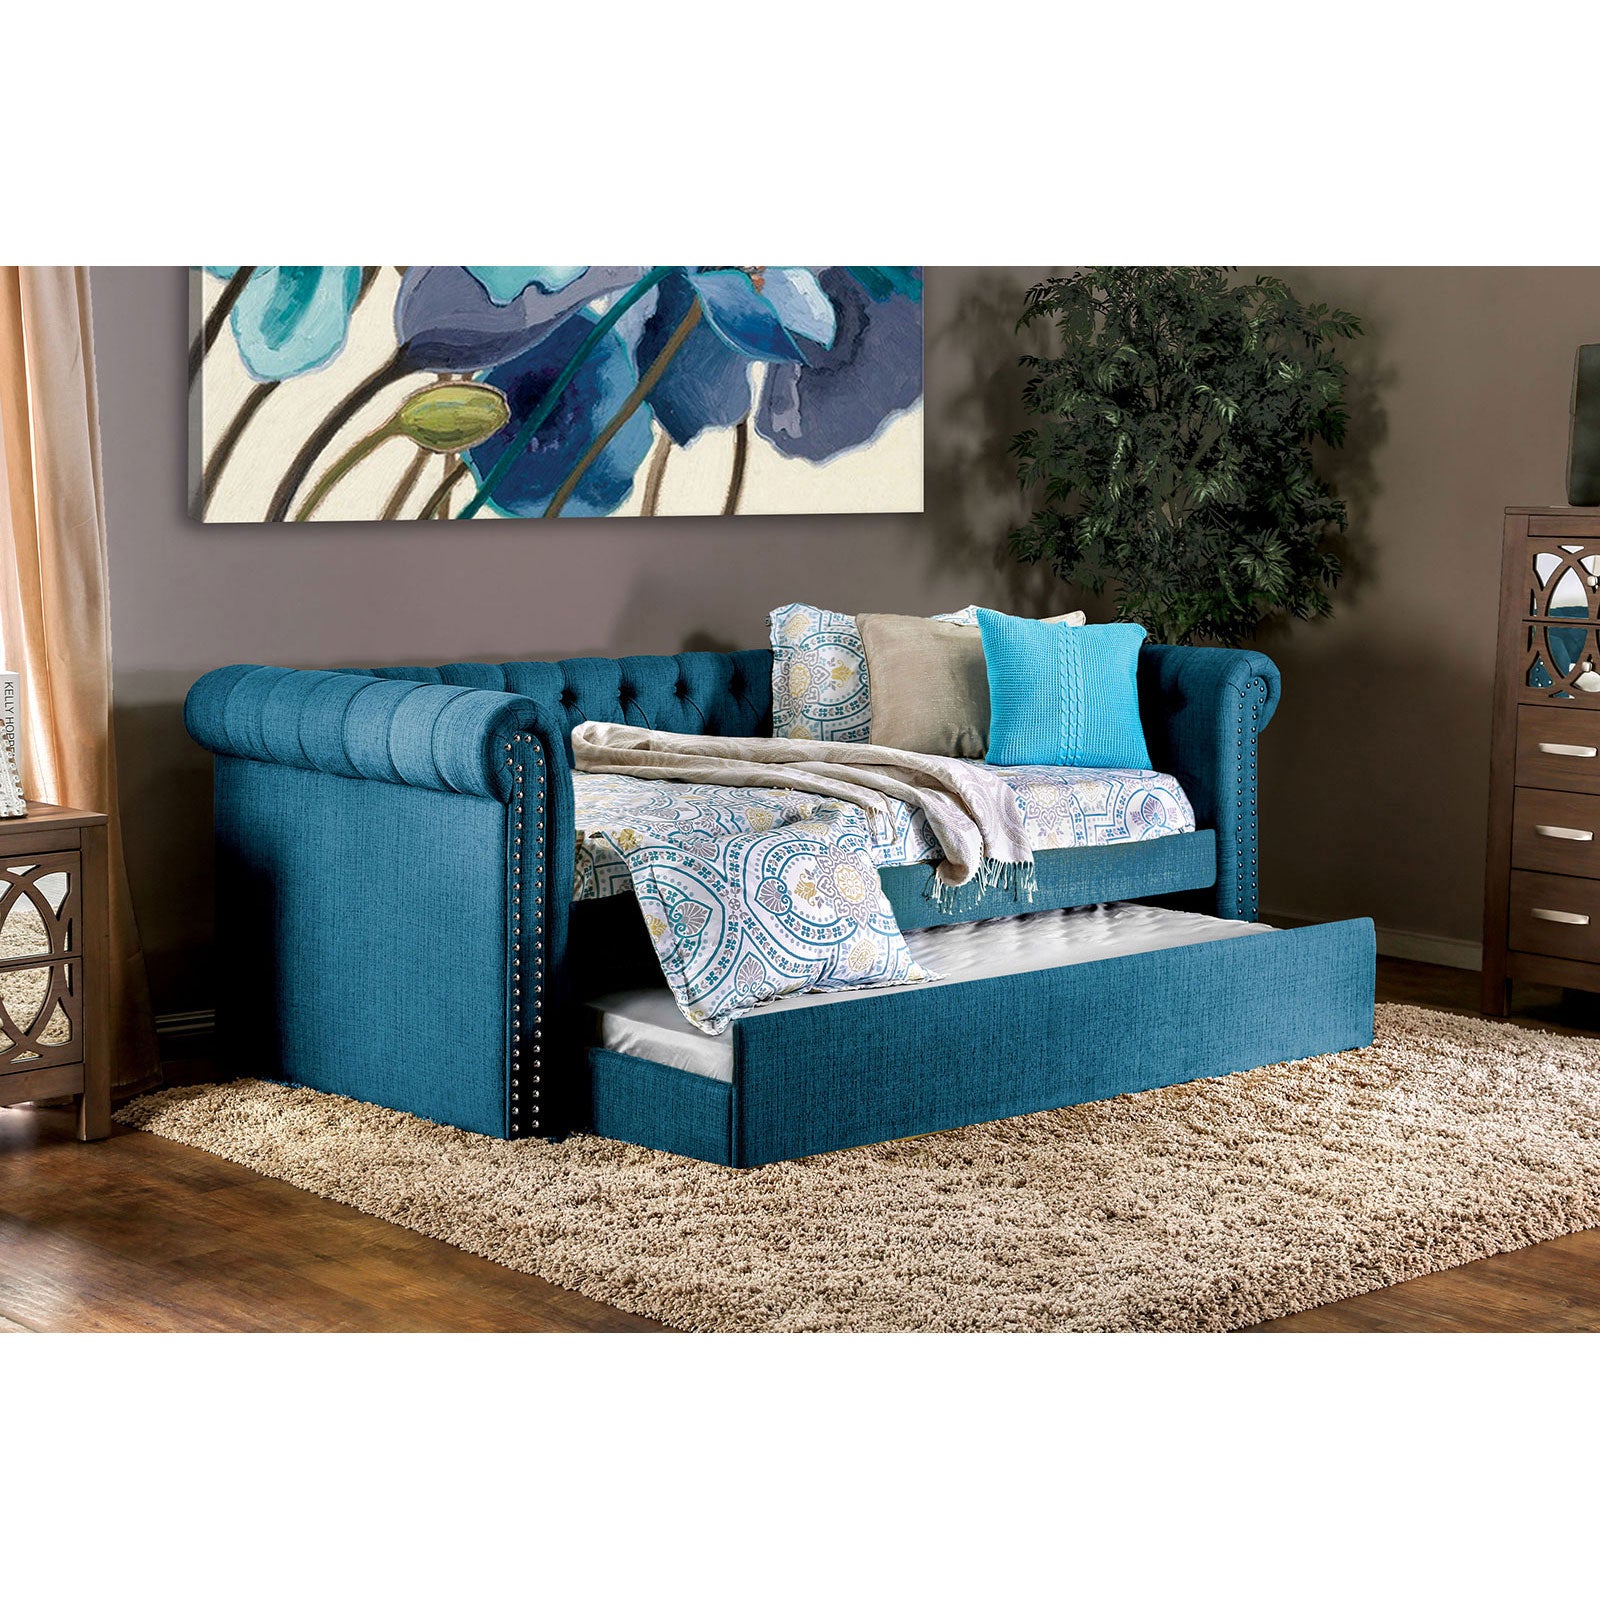 LEANNA Dark Teal Daybed w/ Trundle, Teal image